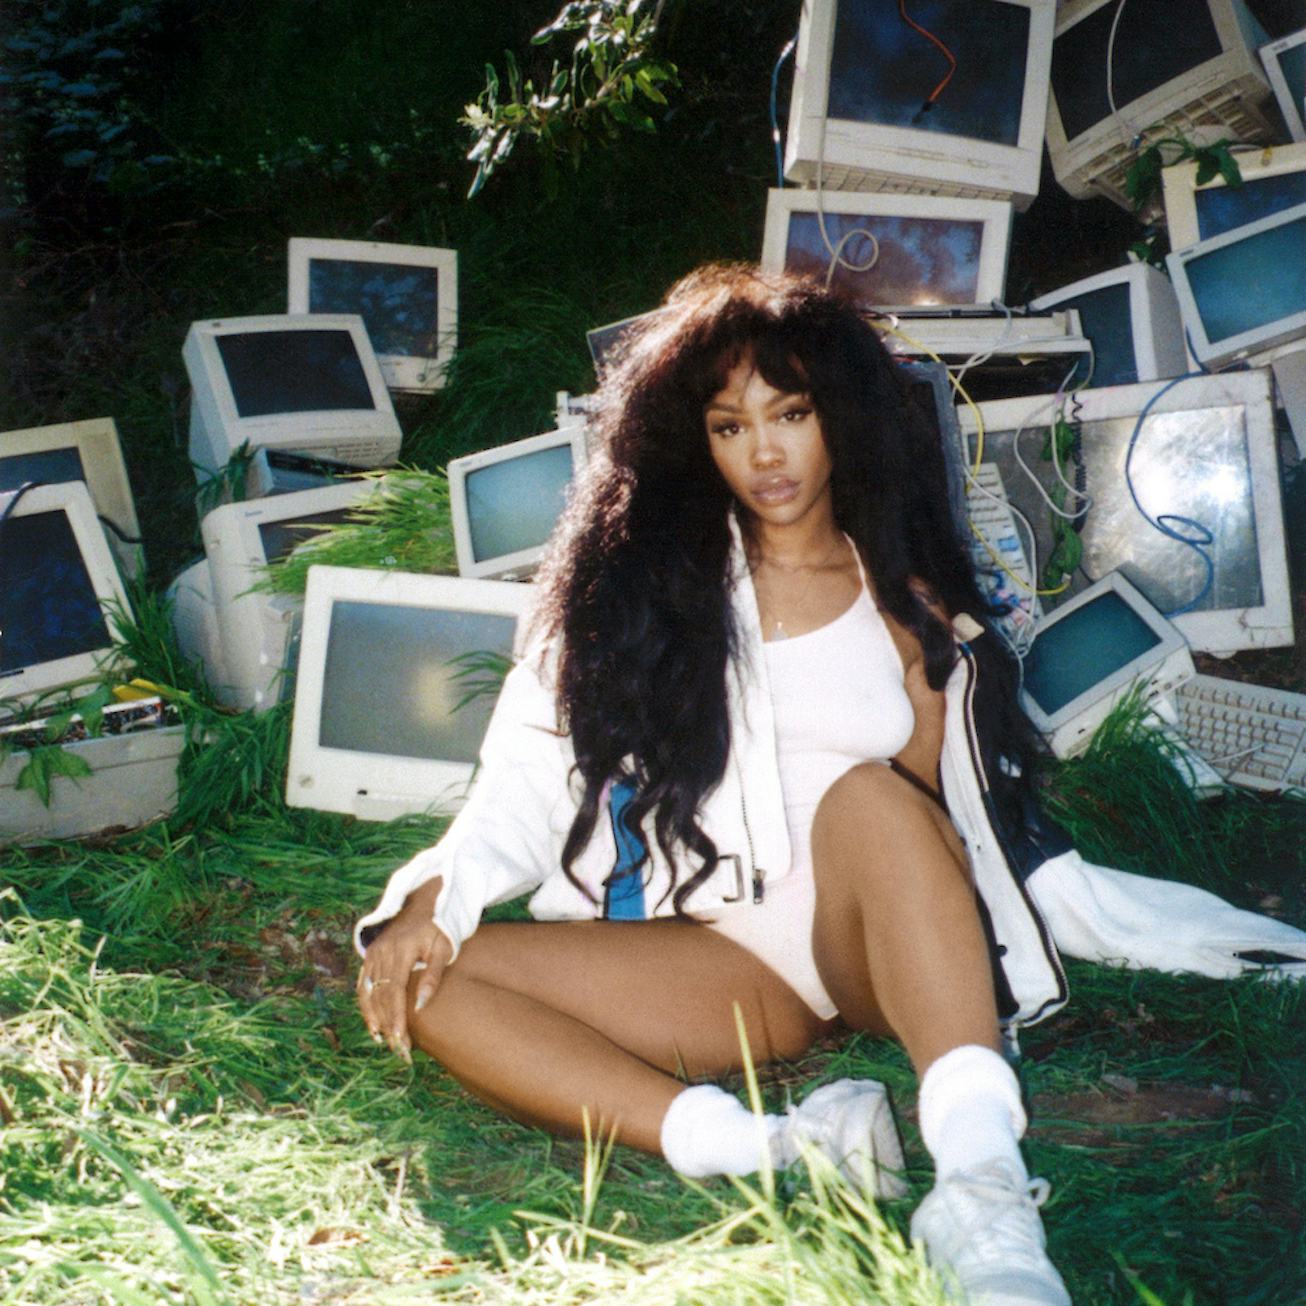 SZA released a 'Ctrl' deluxe album with 7 new songs